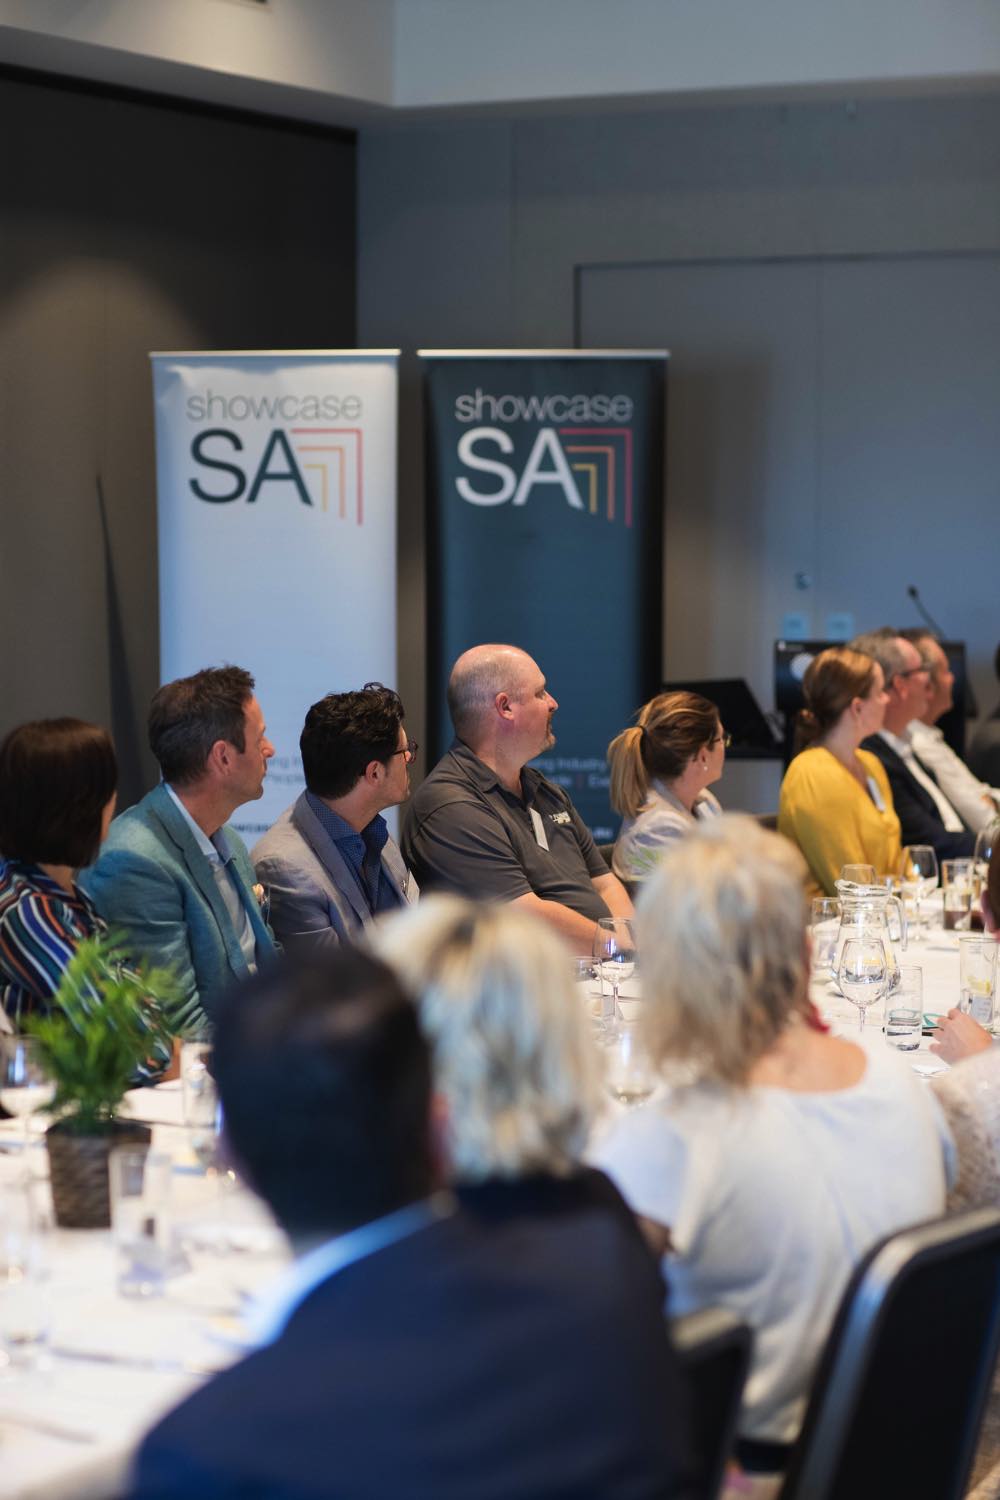 Showcase SA Straight Talking lunch with Brent Hill, SA Tourism Commission (pic: Matthew Kroker Photography)